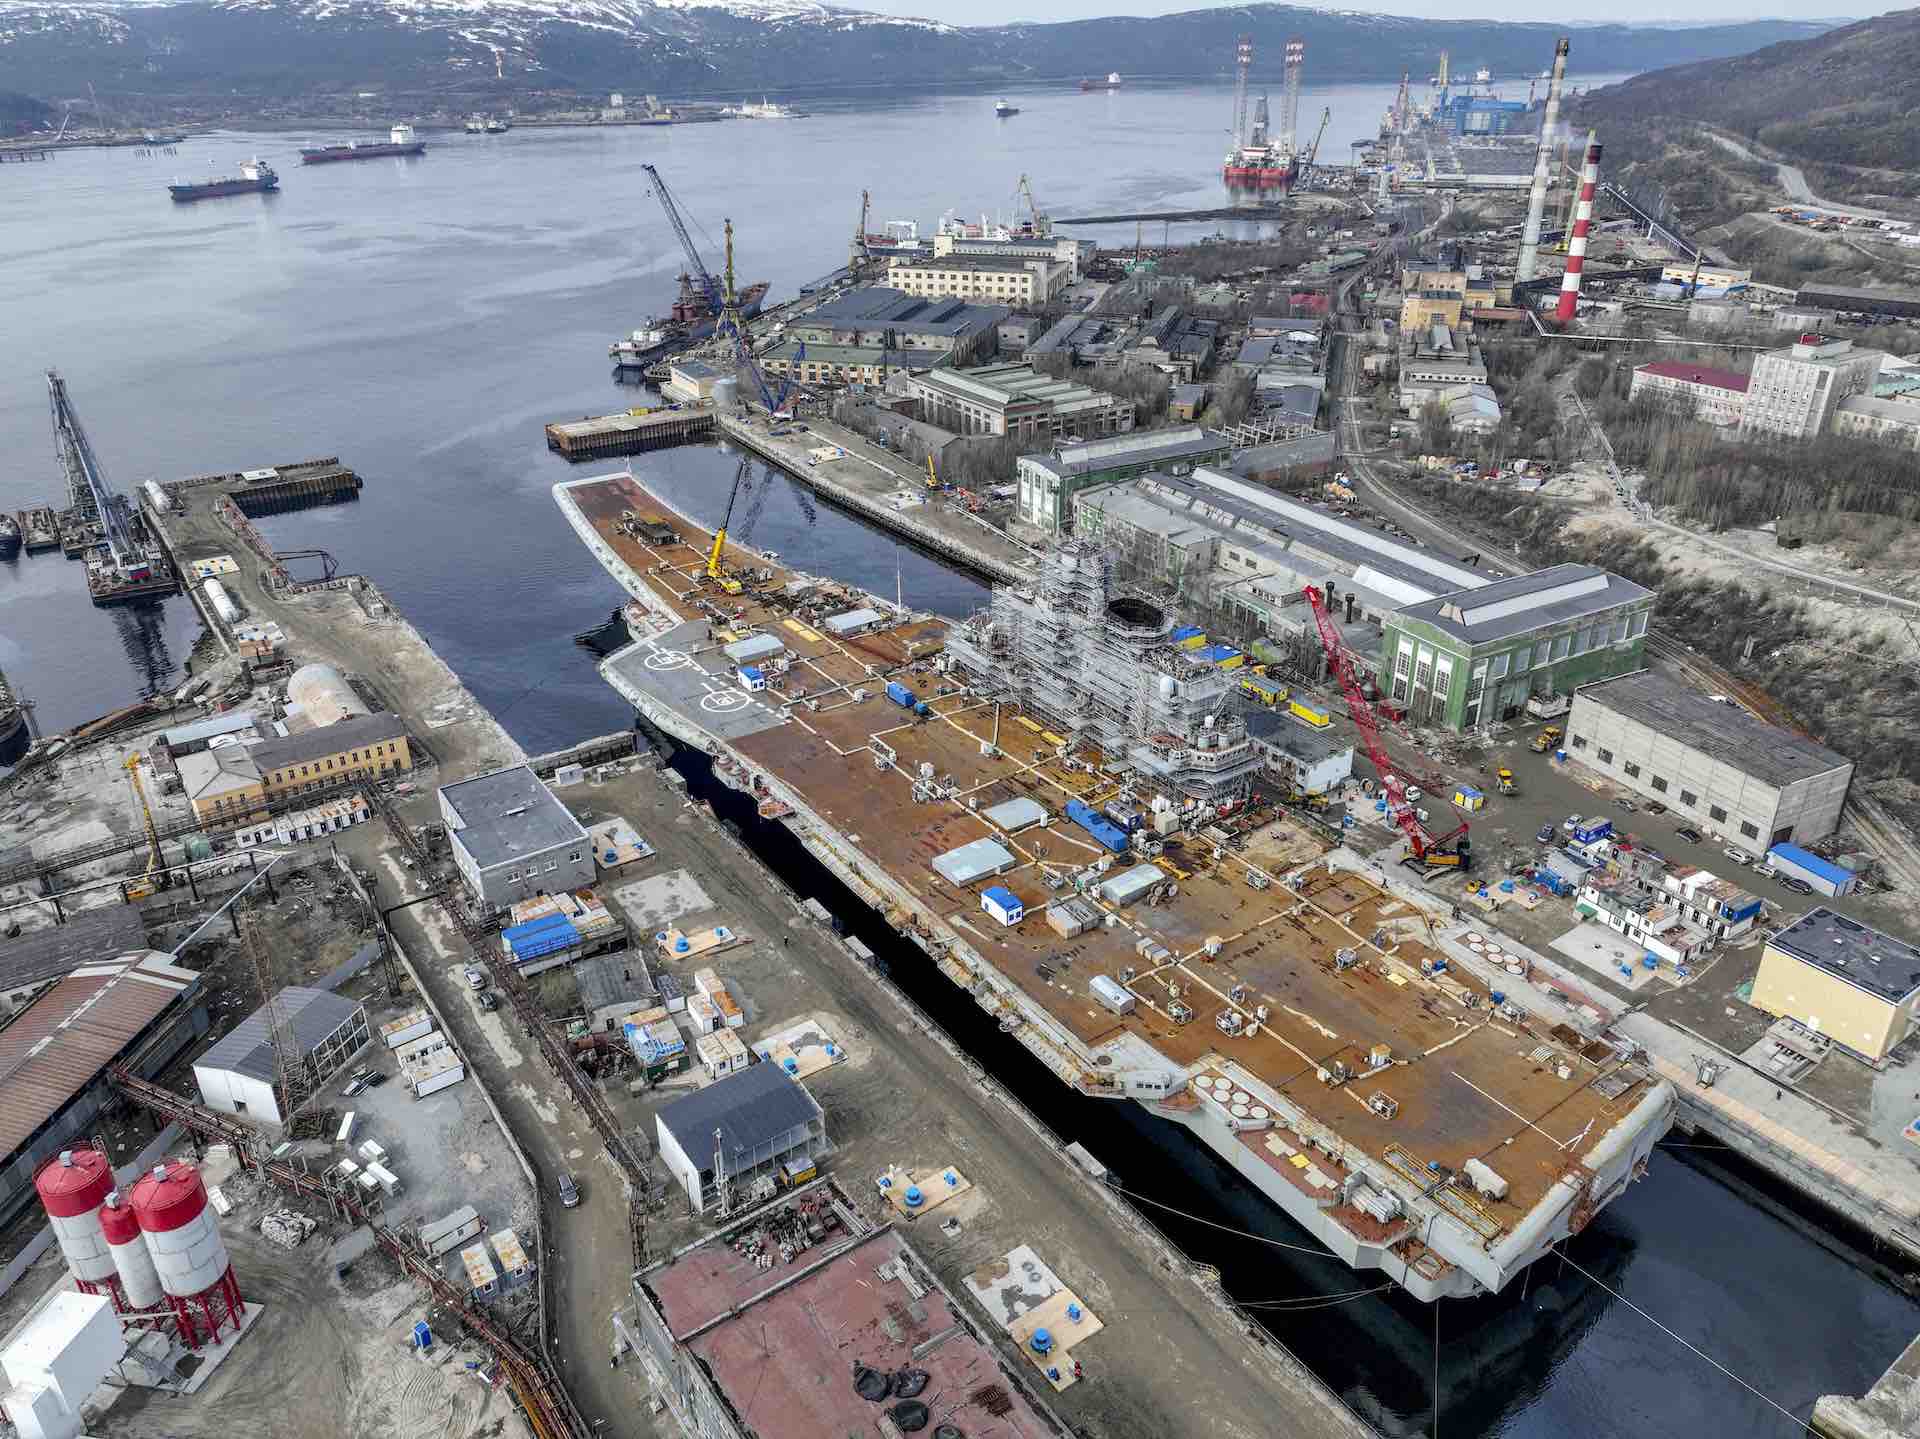 MURMANSK, RUSSIA - MAY 20: Russian Navyâs lone aircraft carrier, the Admiral Flota Sovetskogo Soyuza Kuznetsov, is towed to the 35th squadron shipyard for maintenance and repair works in Murmansk, Russia on May 20, 2022. It is aimed to be completed the maintenance and repair works by the end of 2023. (Photo by Semen Vasileyev/Anadolu Agency via Getty Images)